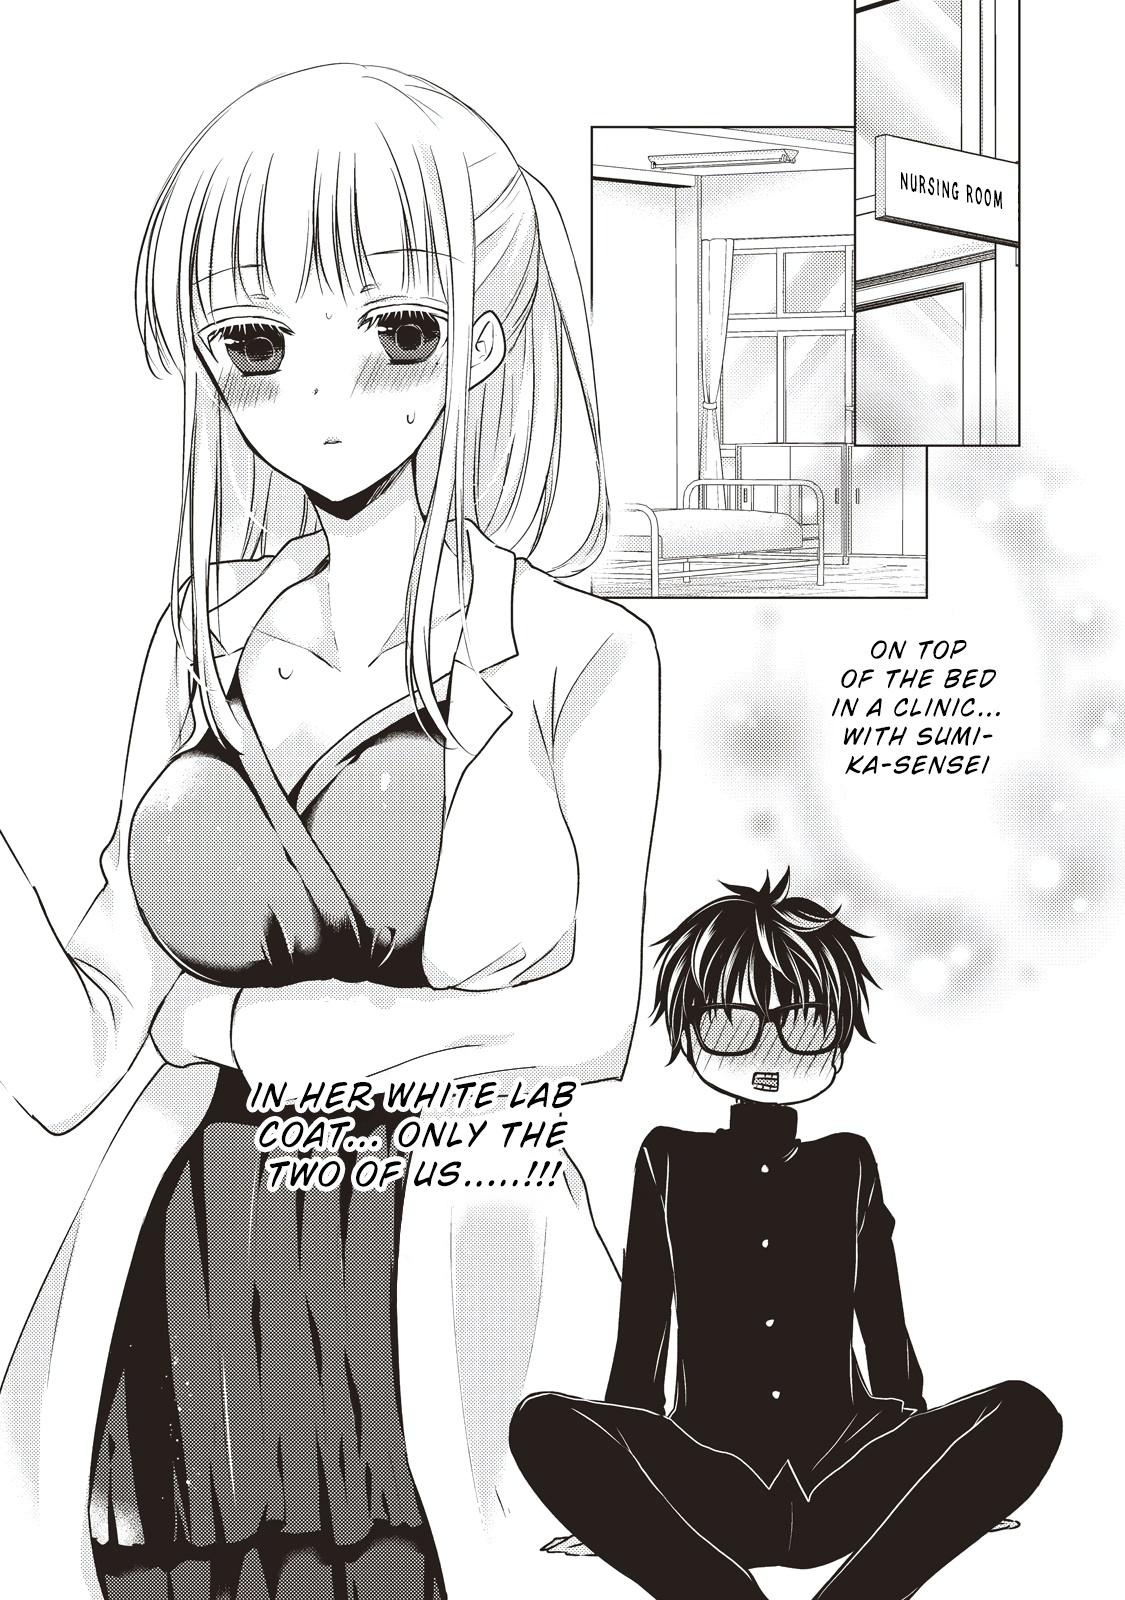 We May Be An Inexperienced Couple But... Vol.4 Chapter 26: Night Infirmary - Picture 2